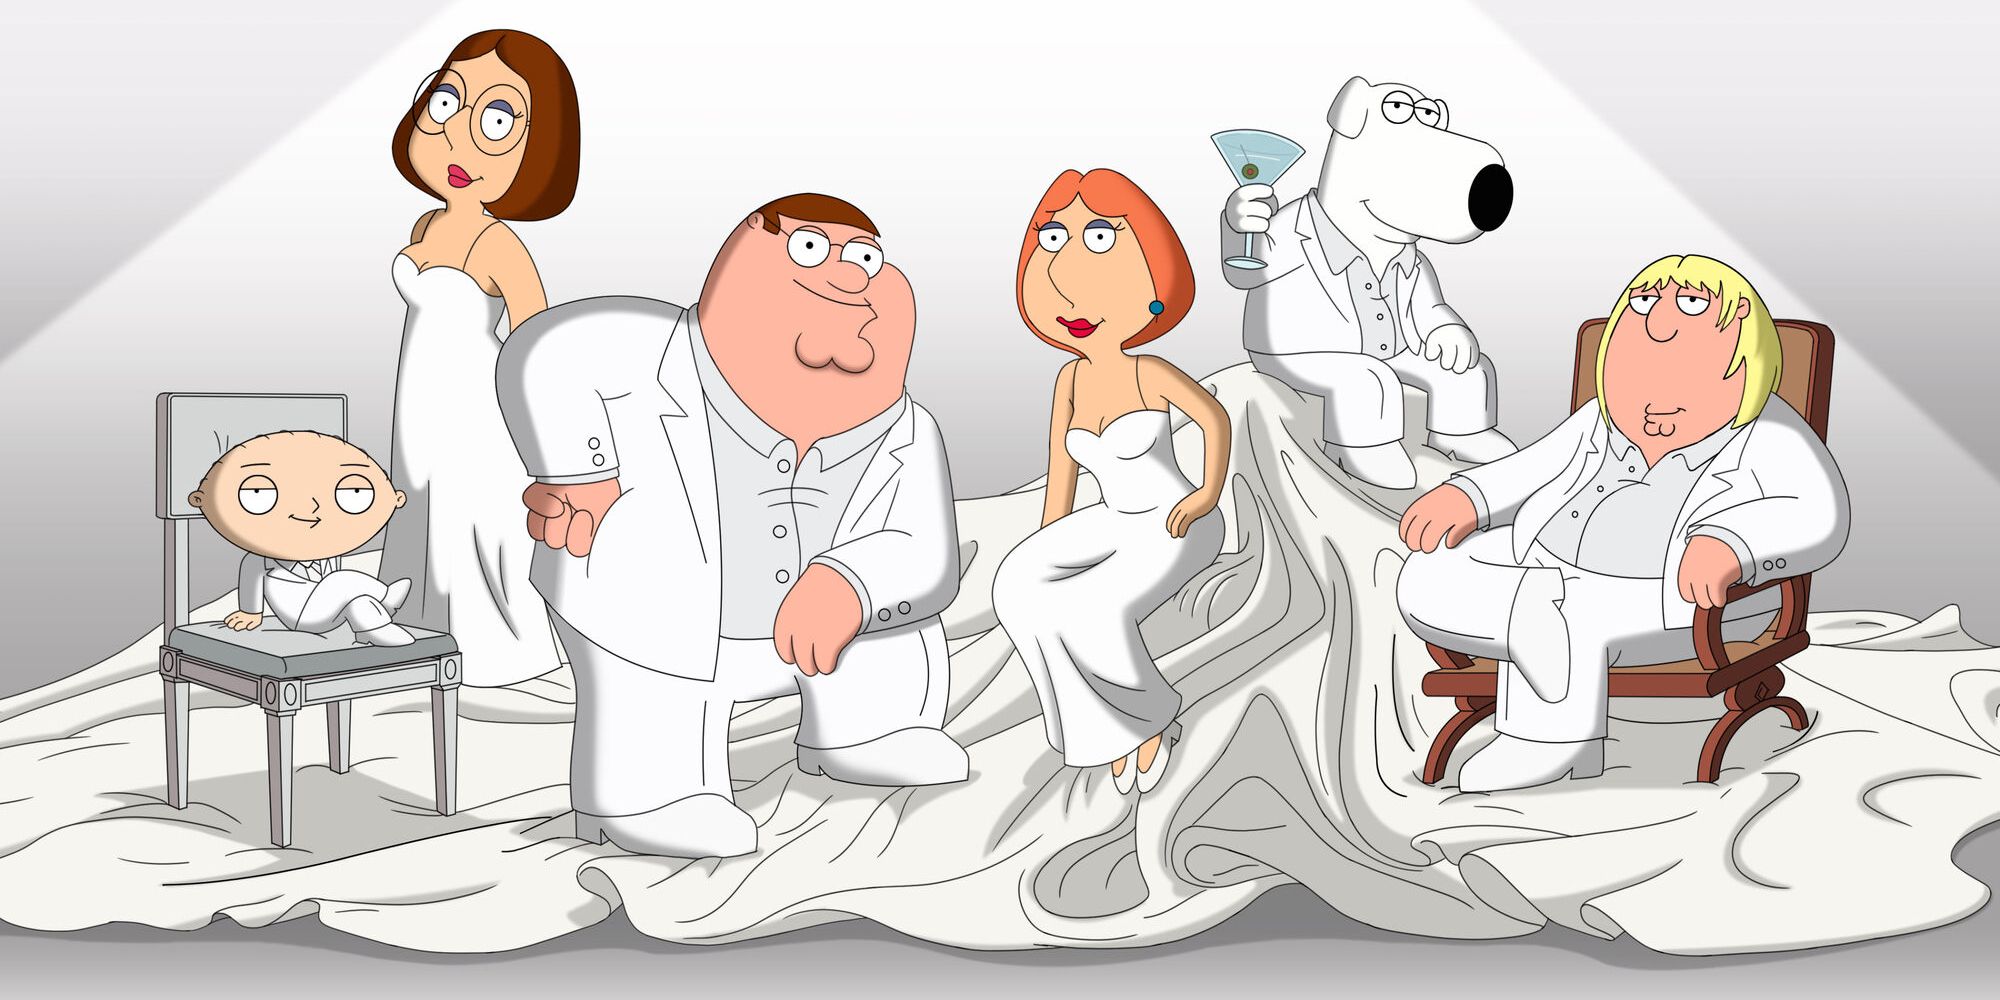 A promotional image from the Family Guy episode "Emmy-Winning Episode."